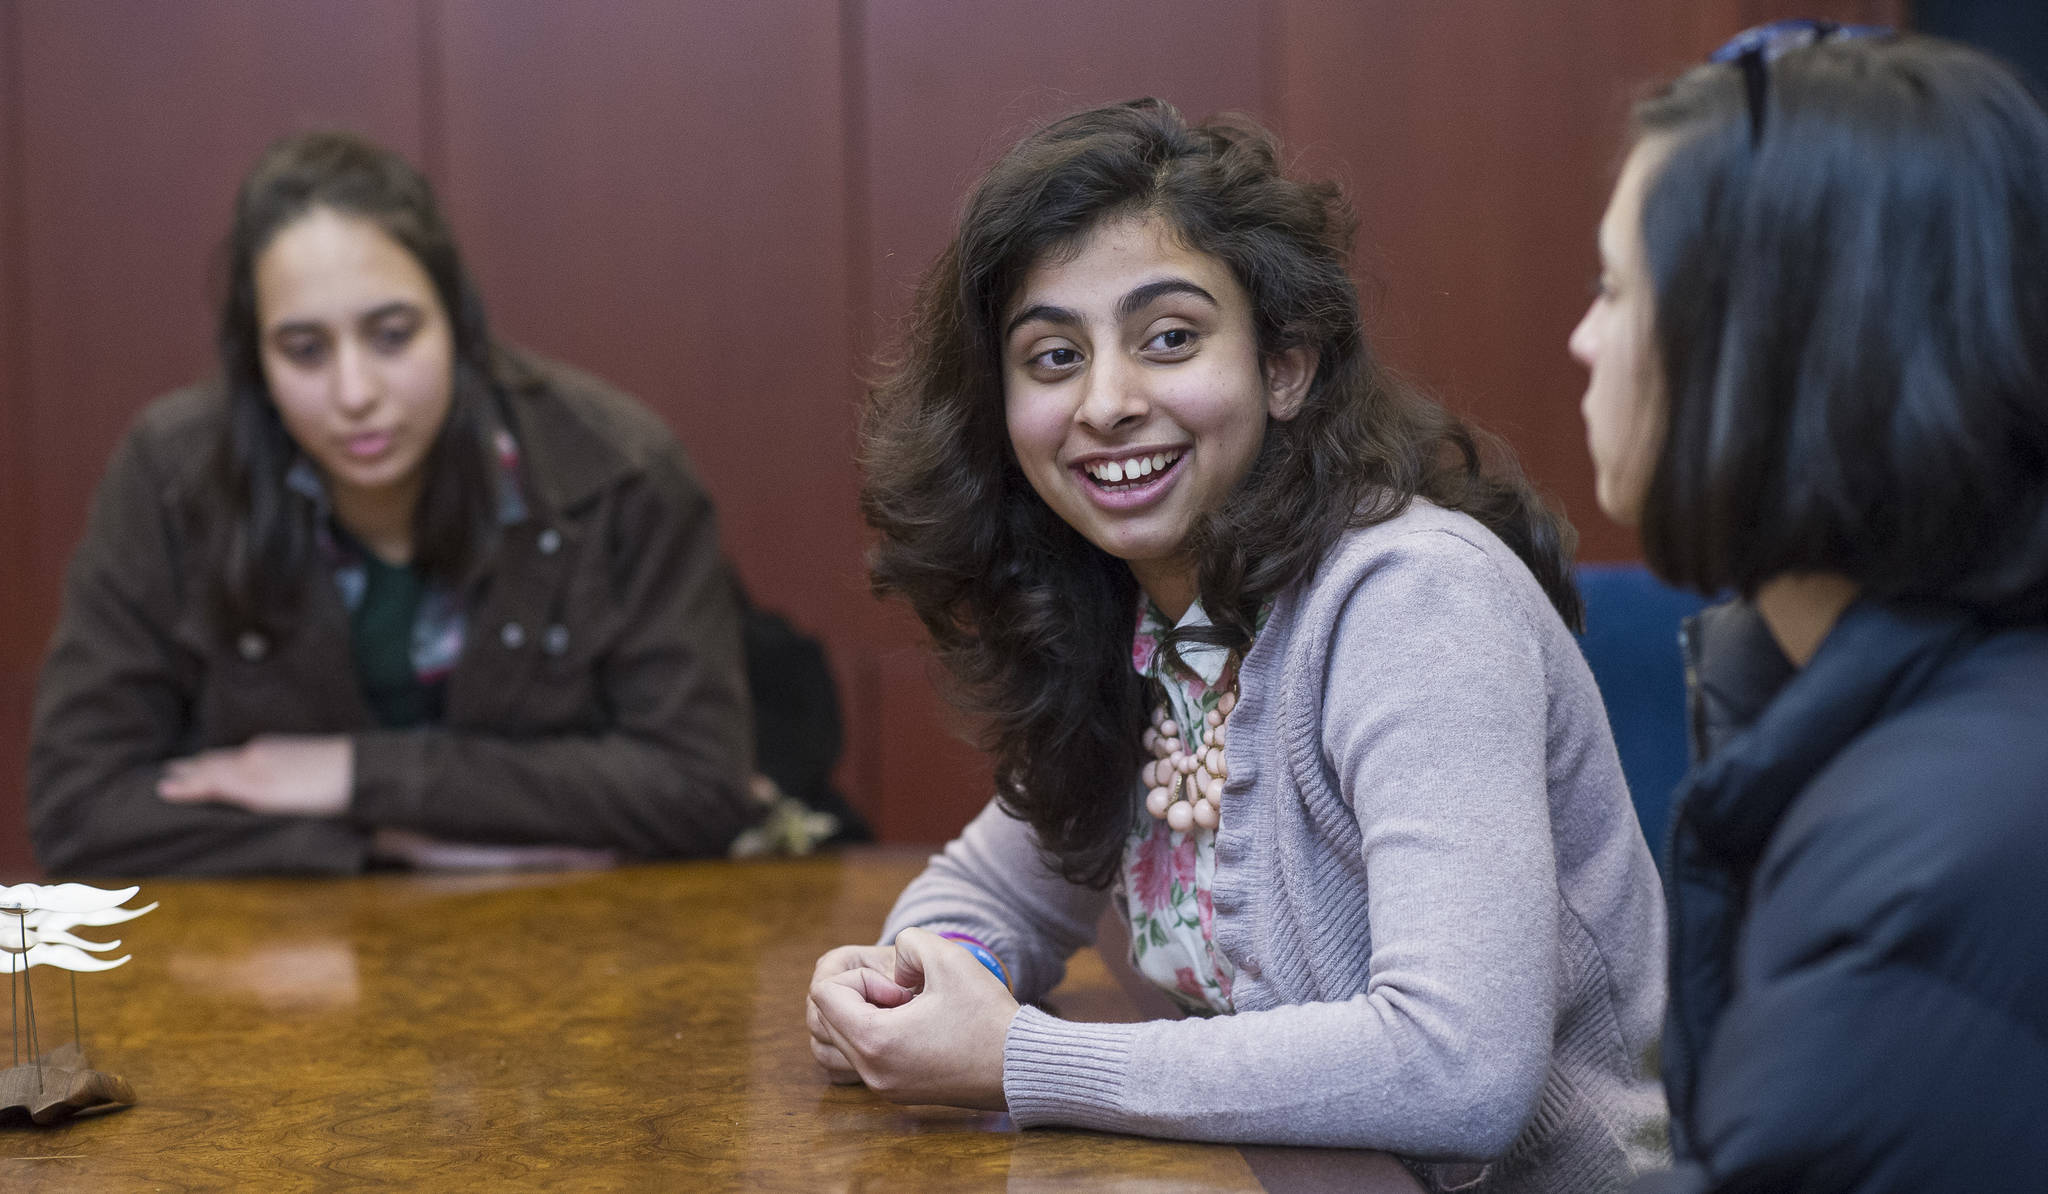 Shanzila Ahmad discusses her exchange experience while Ceren Gokpinar and Haifa Alsafadi listen. Michael Penn | Capital City Weekly.